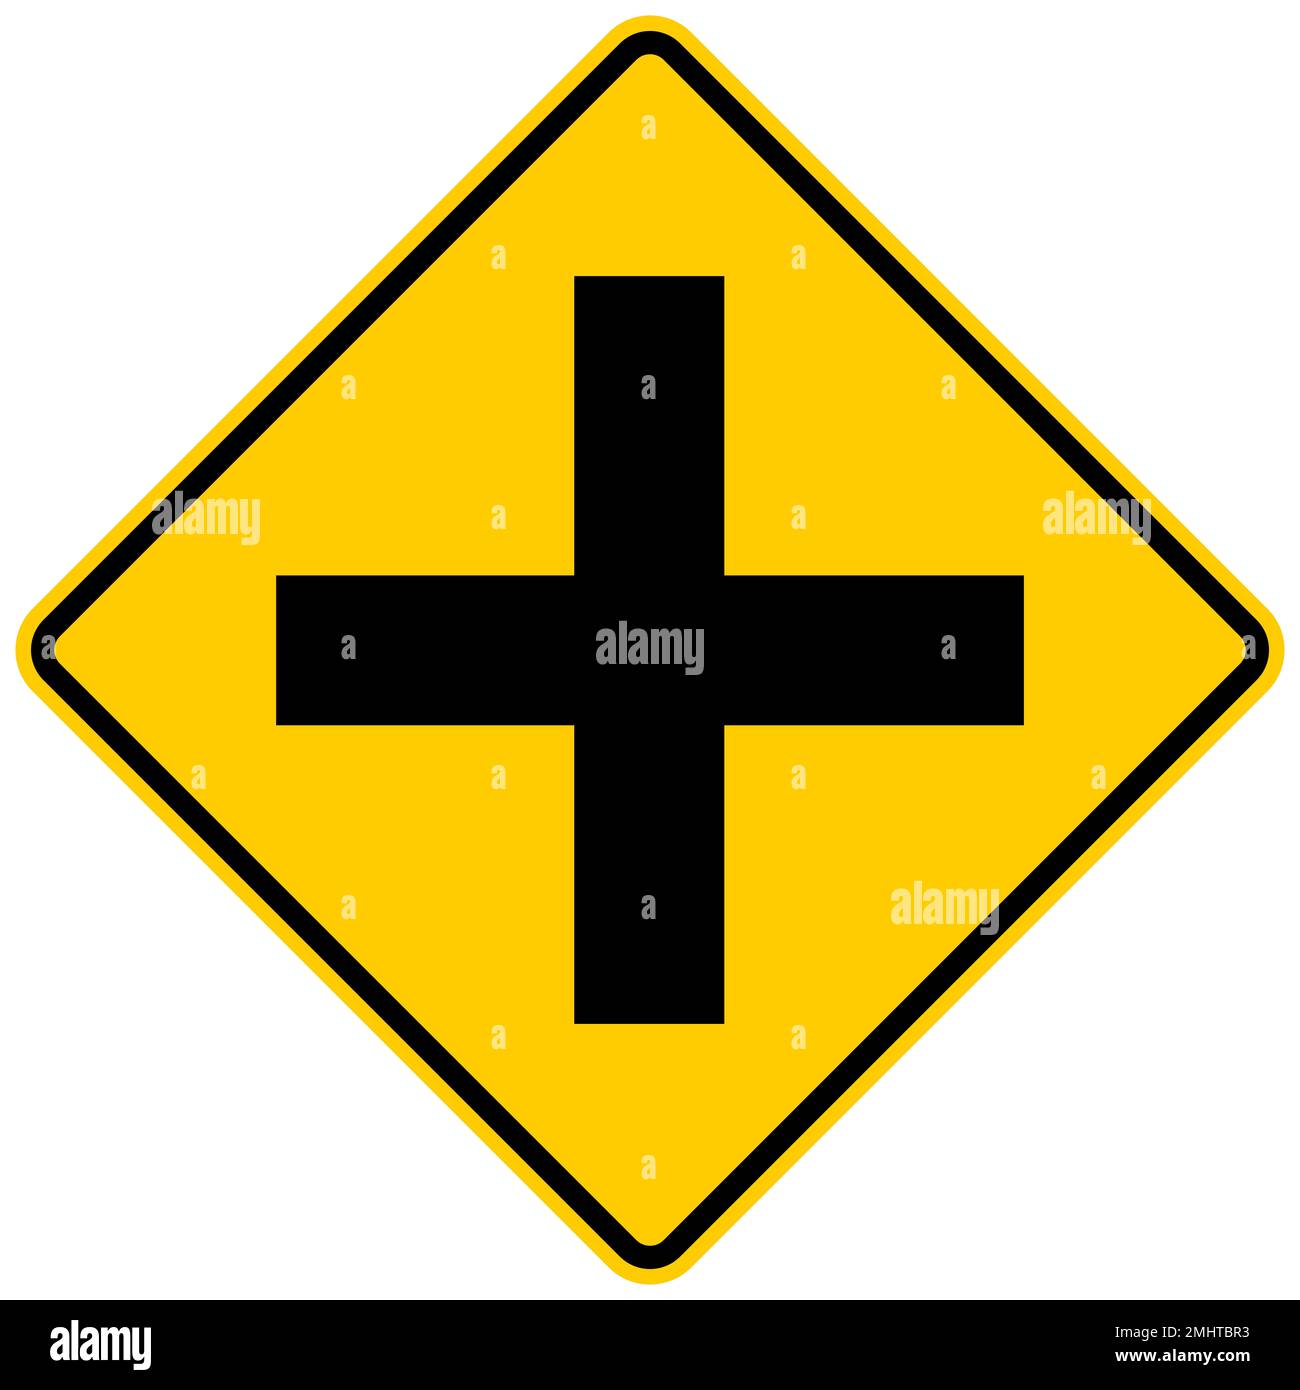 Cross road intersection warning sign Stock Photo